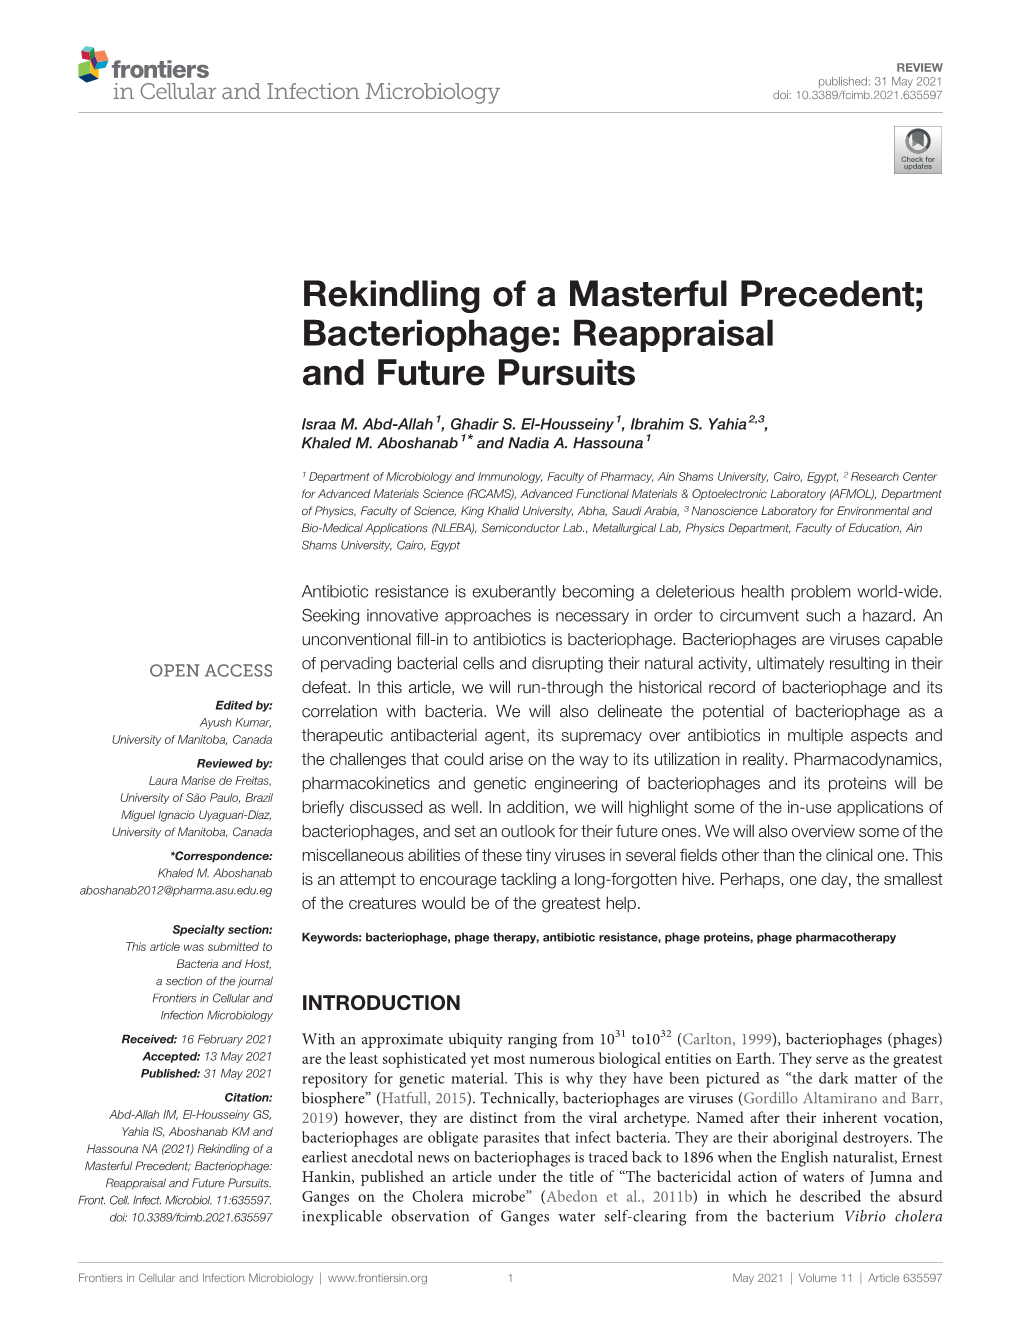 Rekindling of a Masterful Precedent; Bacteriophage: Reappraisal &#146;And Future Pursuits